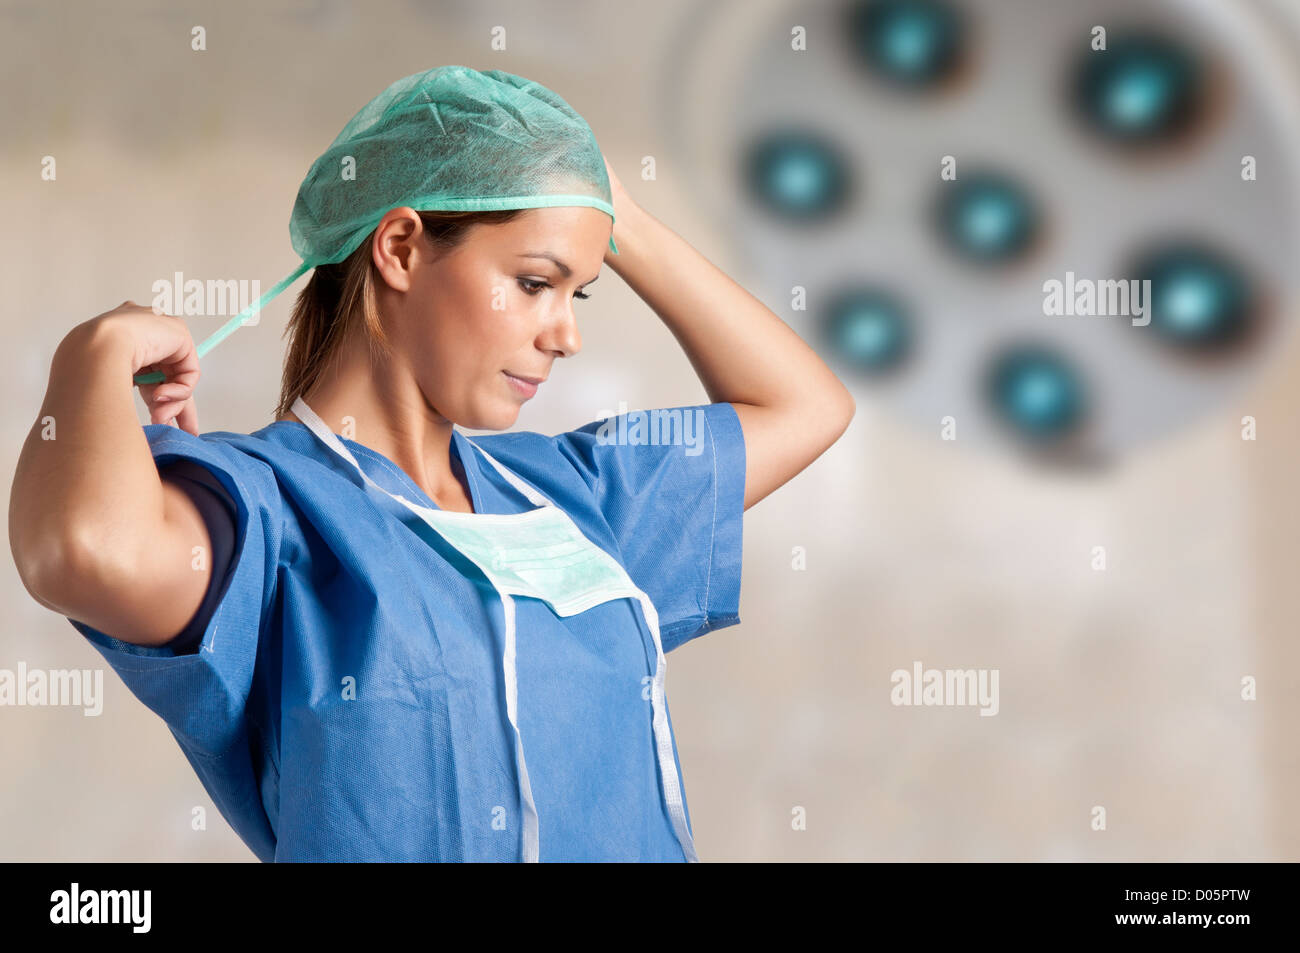 Young female surgeon getting ready for a surgery Stock Photo